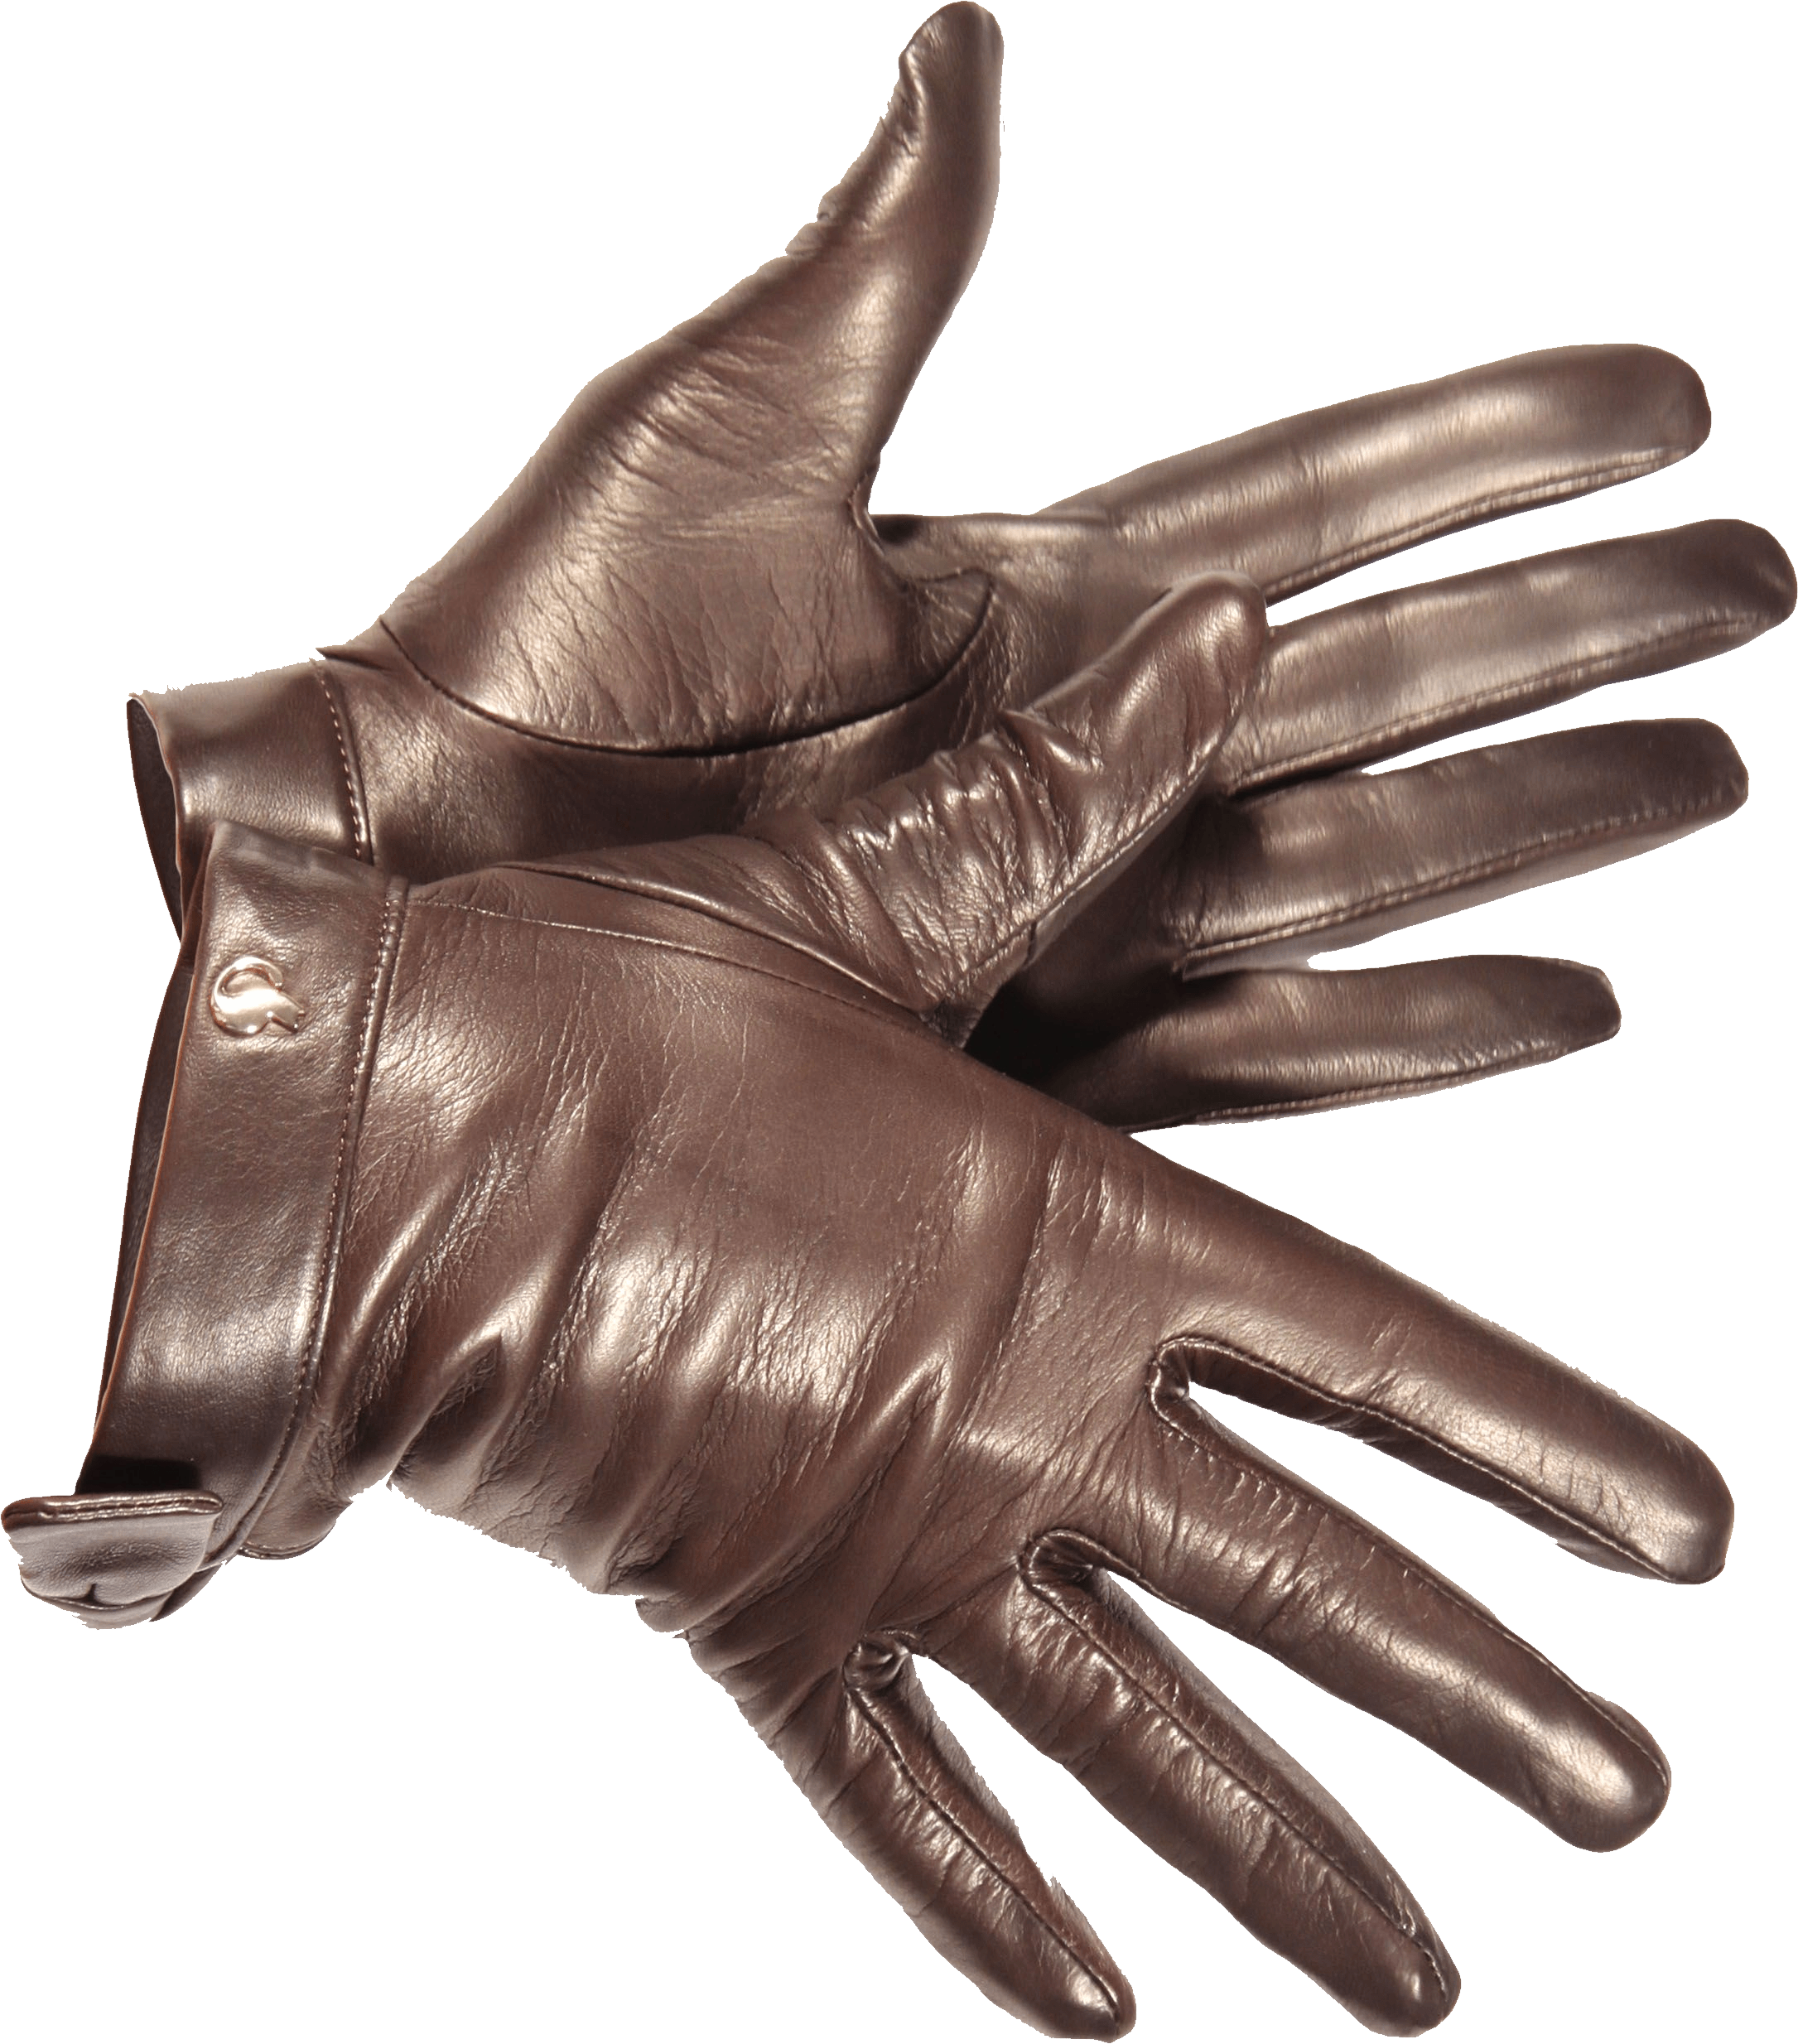 Leather Gloves Png Image PNG Image